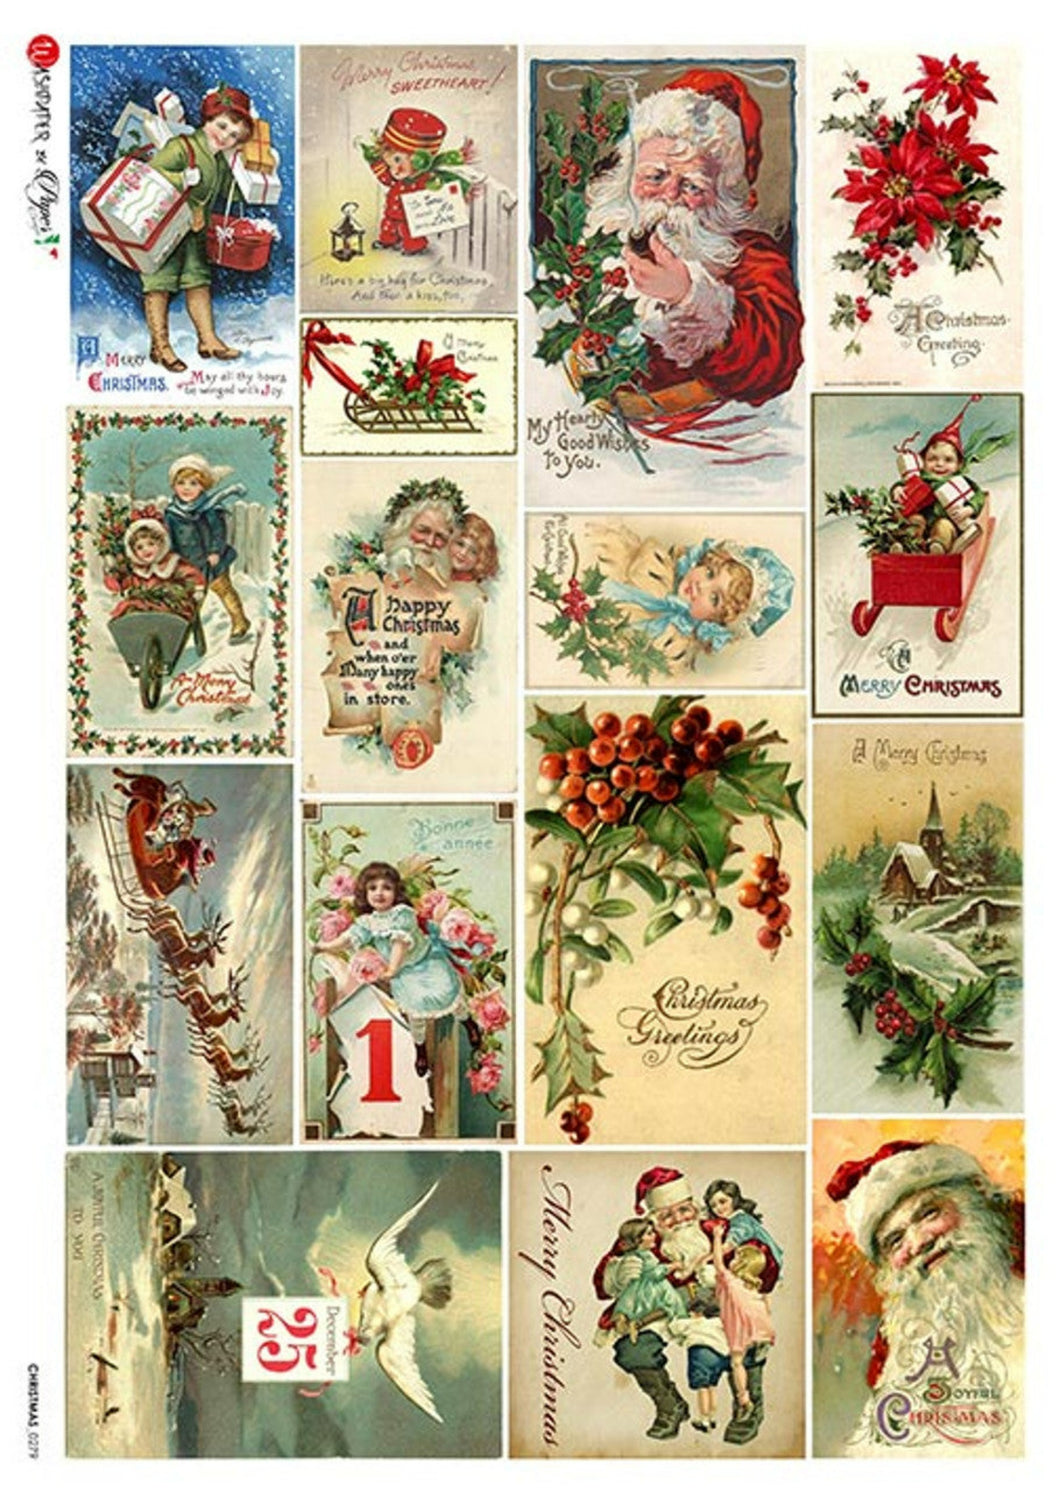 Christmas 0279 by Paper Designs Washipaper, Decoupage, A4